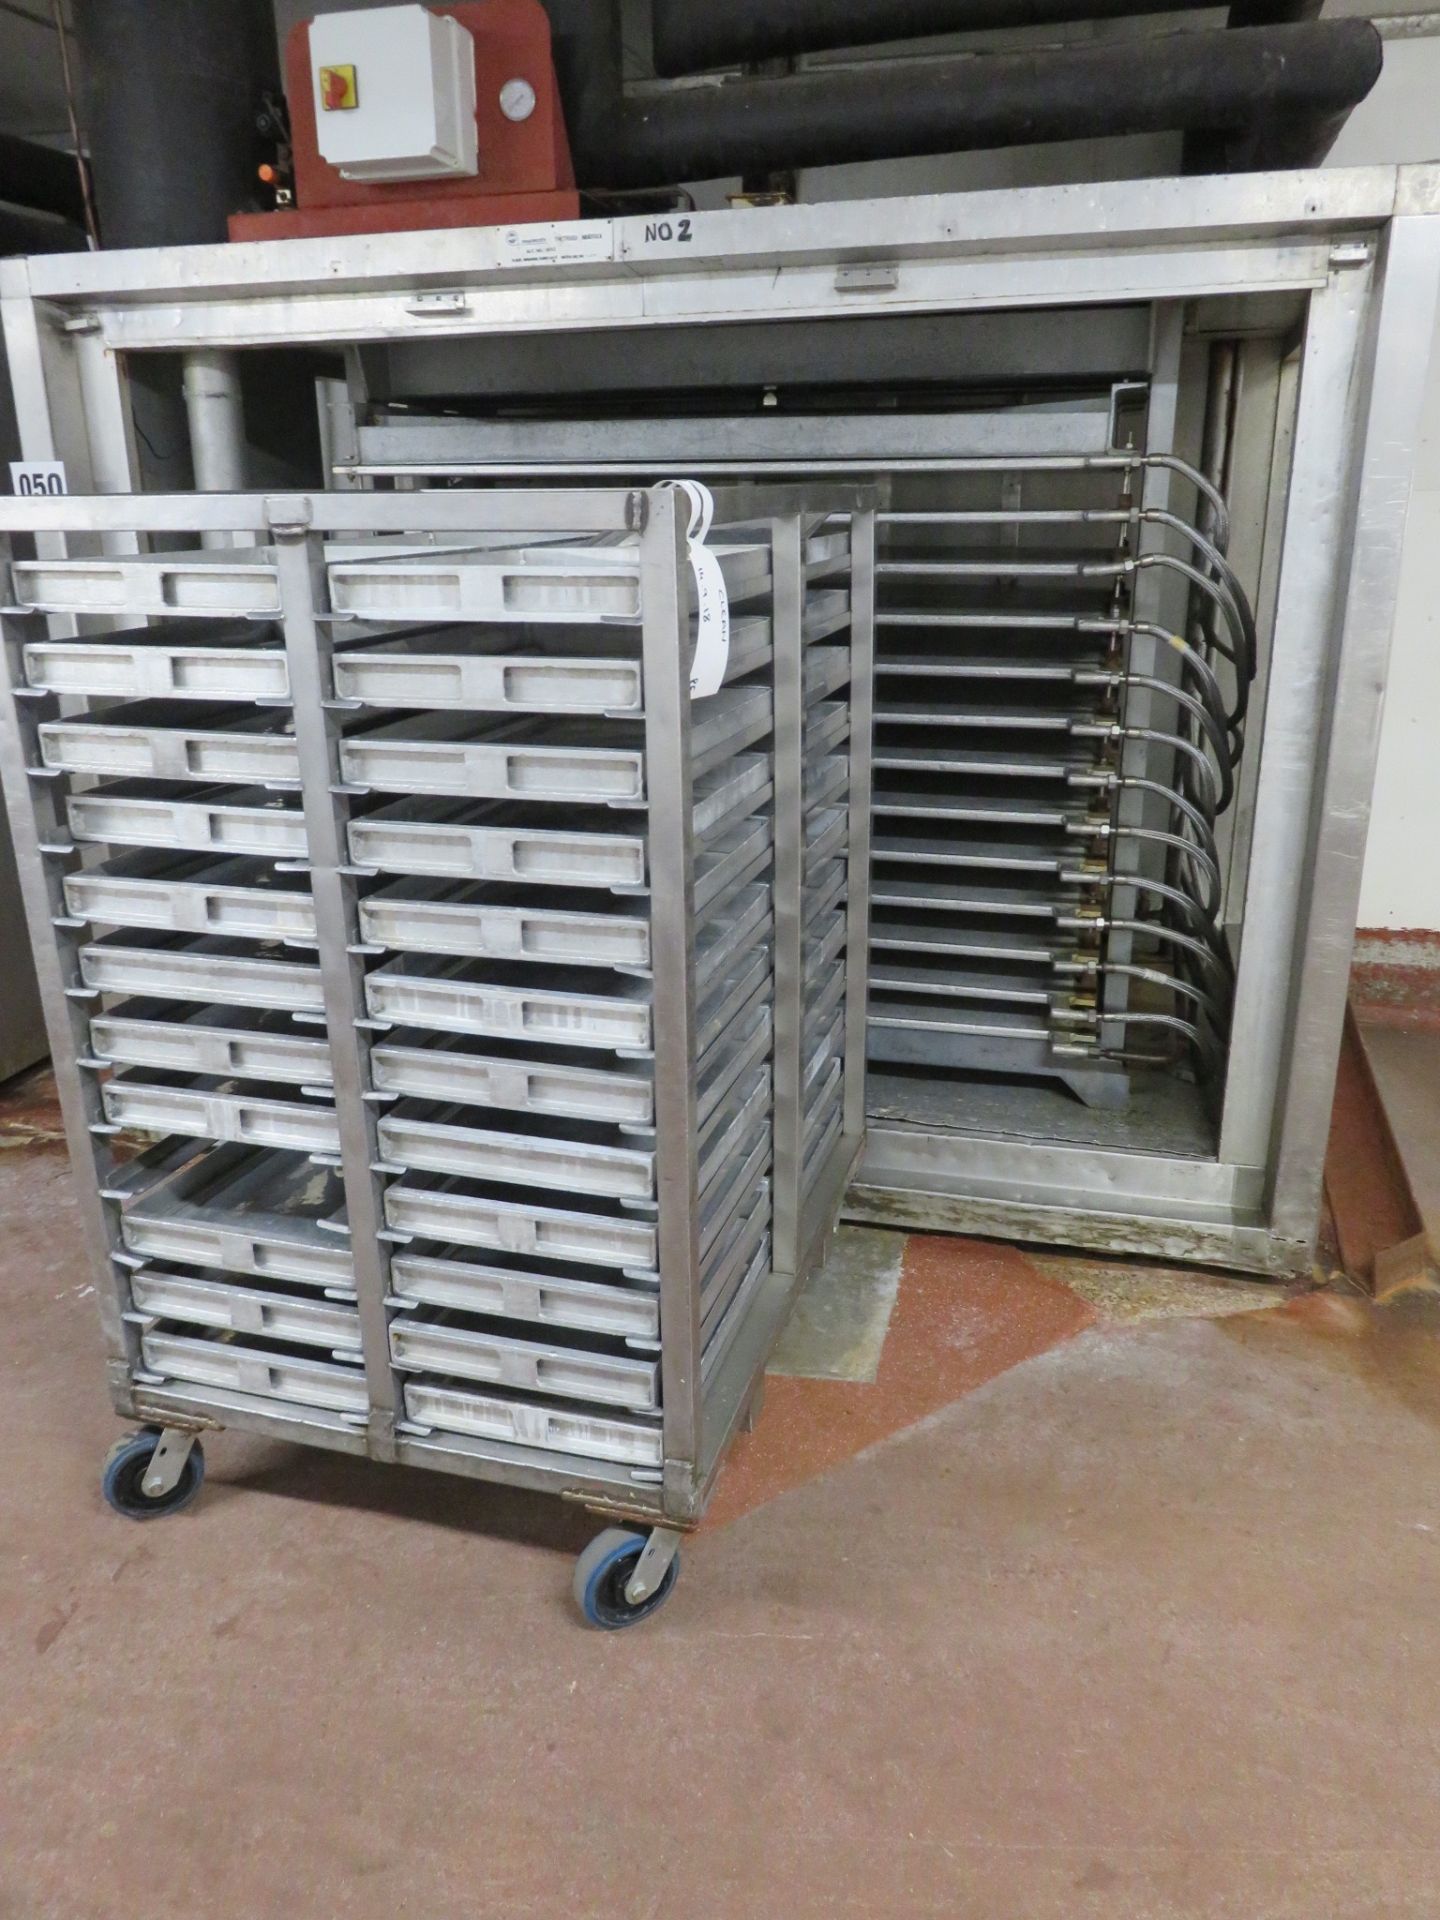 2 x APV Parafreeze Plate Freezers approx. 2.7 x 1.6 meters. 12 Station 1.1 x 1.6 meter Lift out £900 - Image 7 of 16